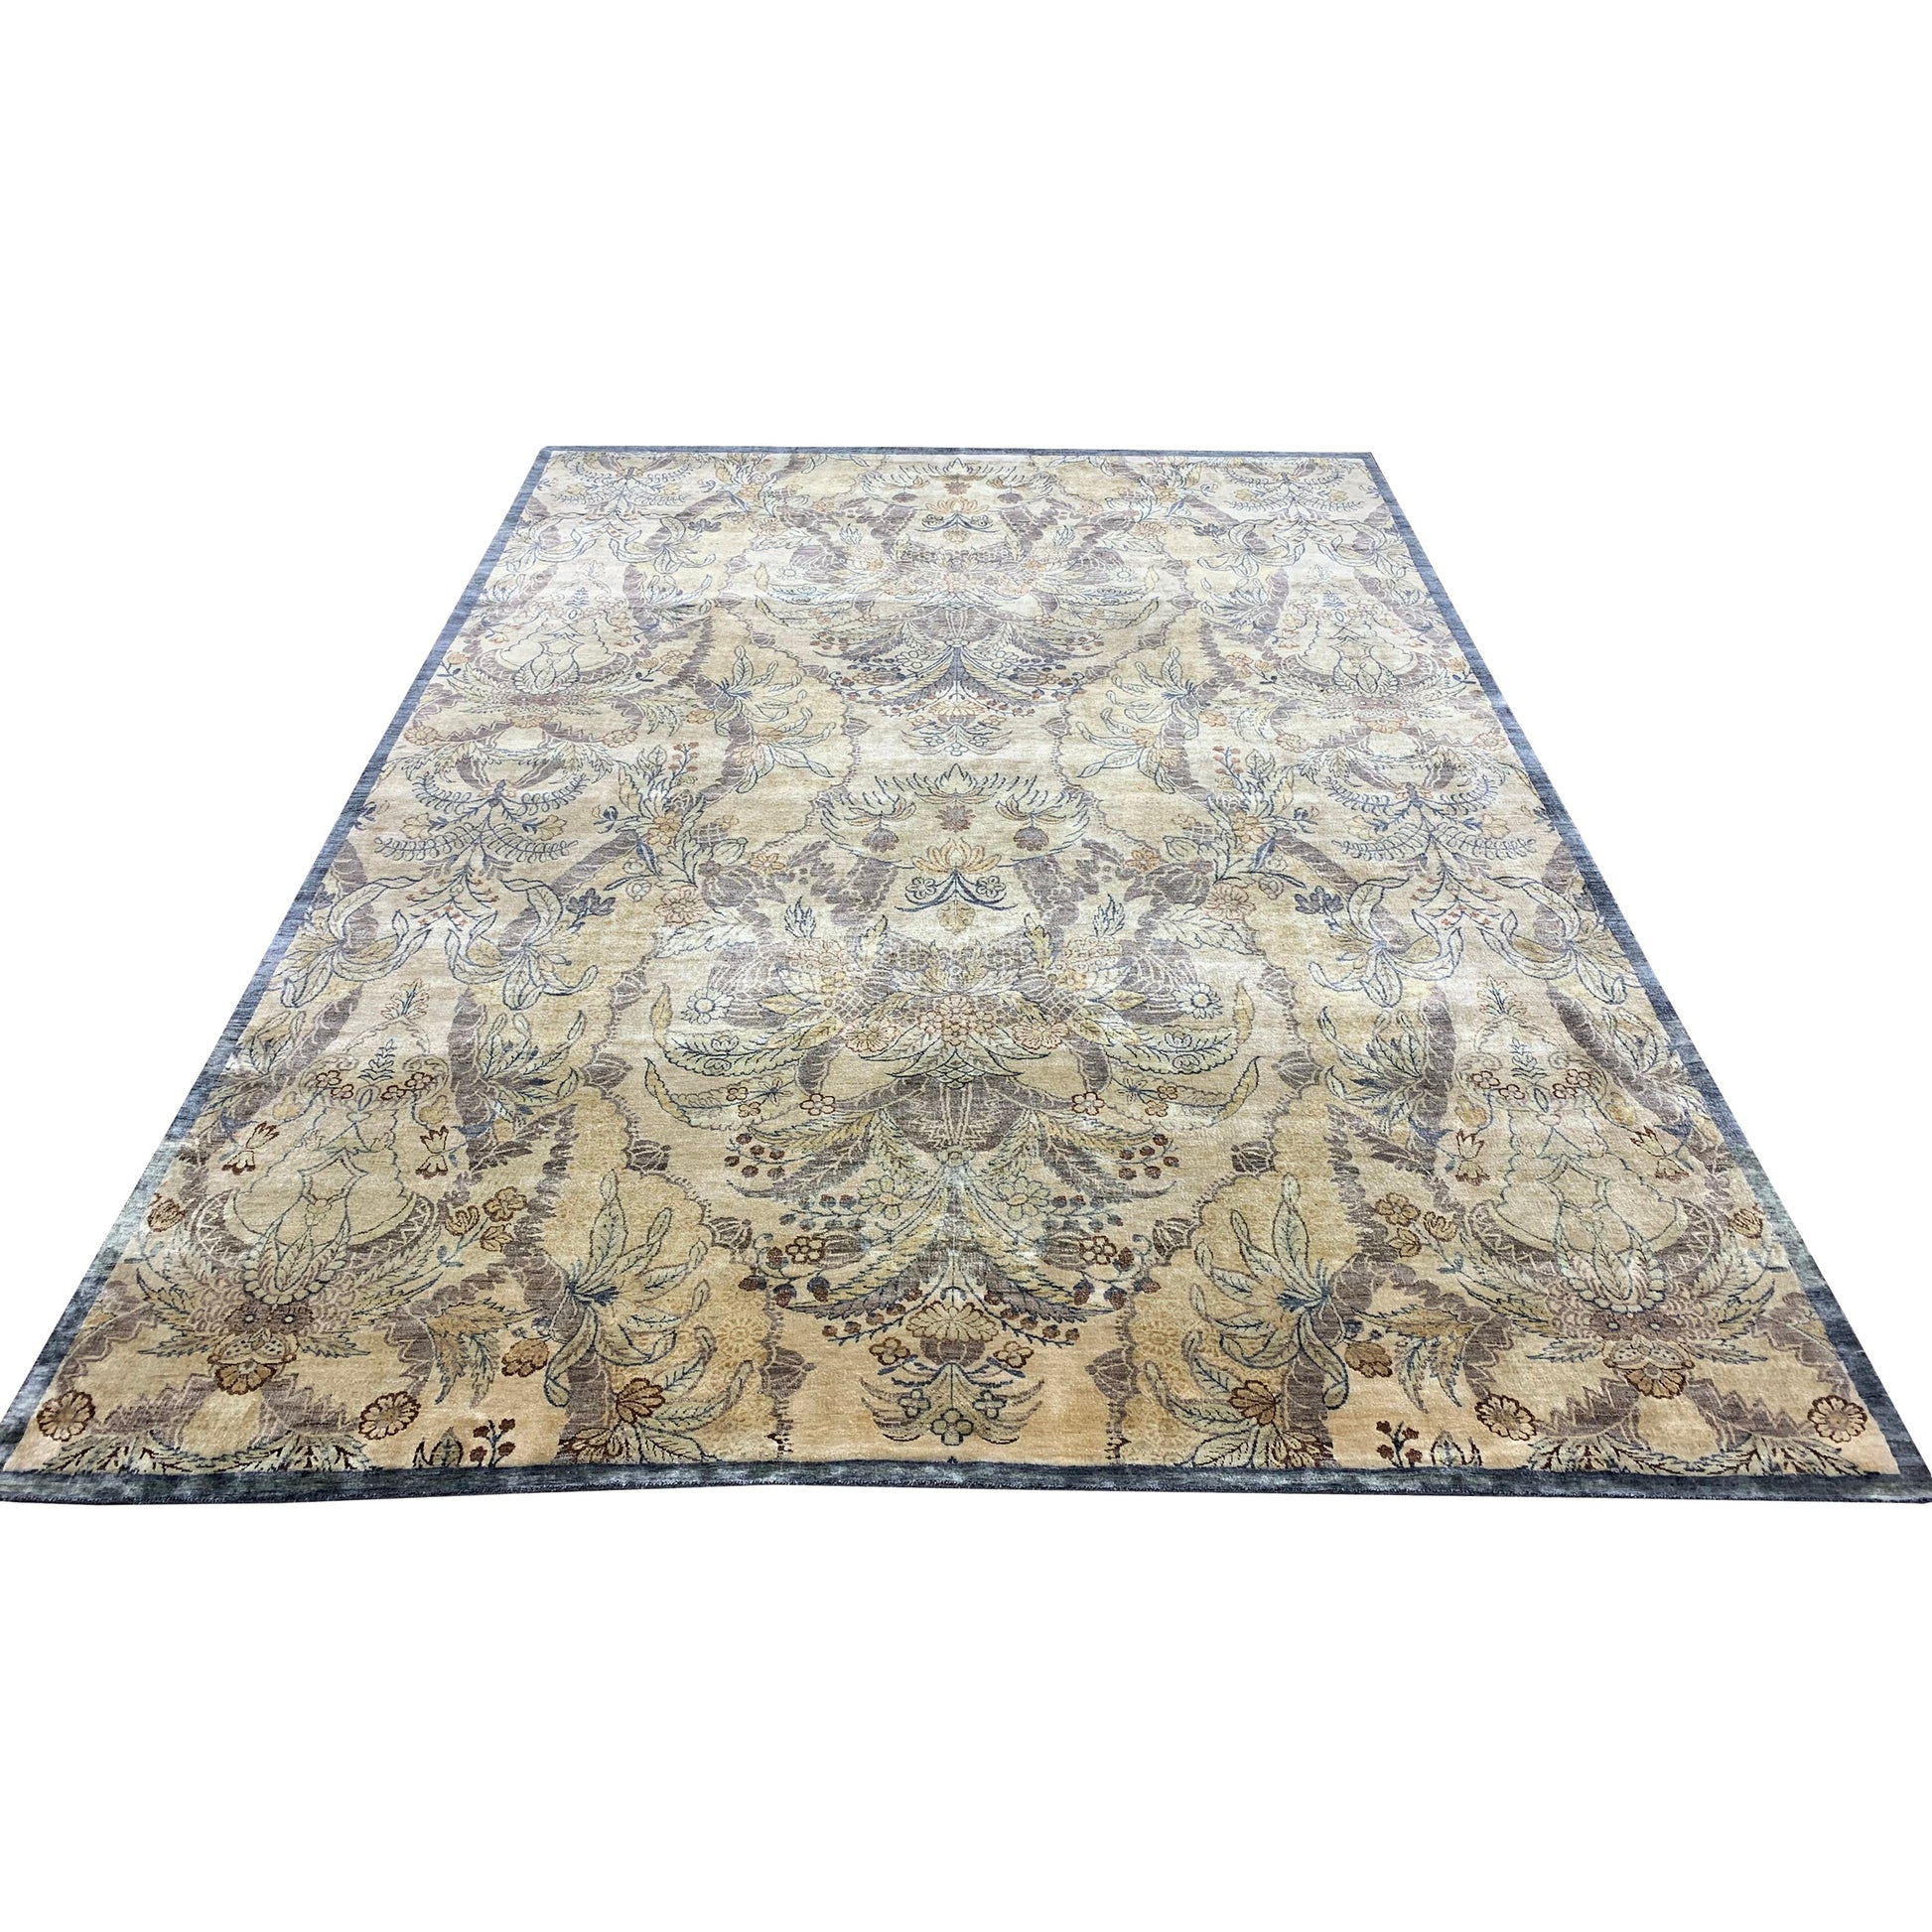 Get trendy with L.Gold and Charcoal Pure Silk Transitional Handknotted Area Rug 8.11x11.11ft 271x367Cms - Contemporary Rugs available at Jaipur Oriental Rugs. Grab yours for $12750.20 today!